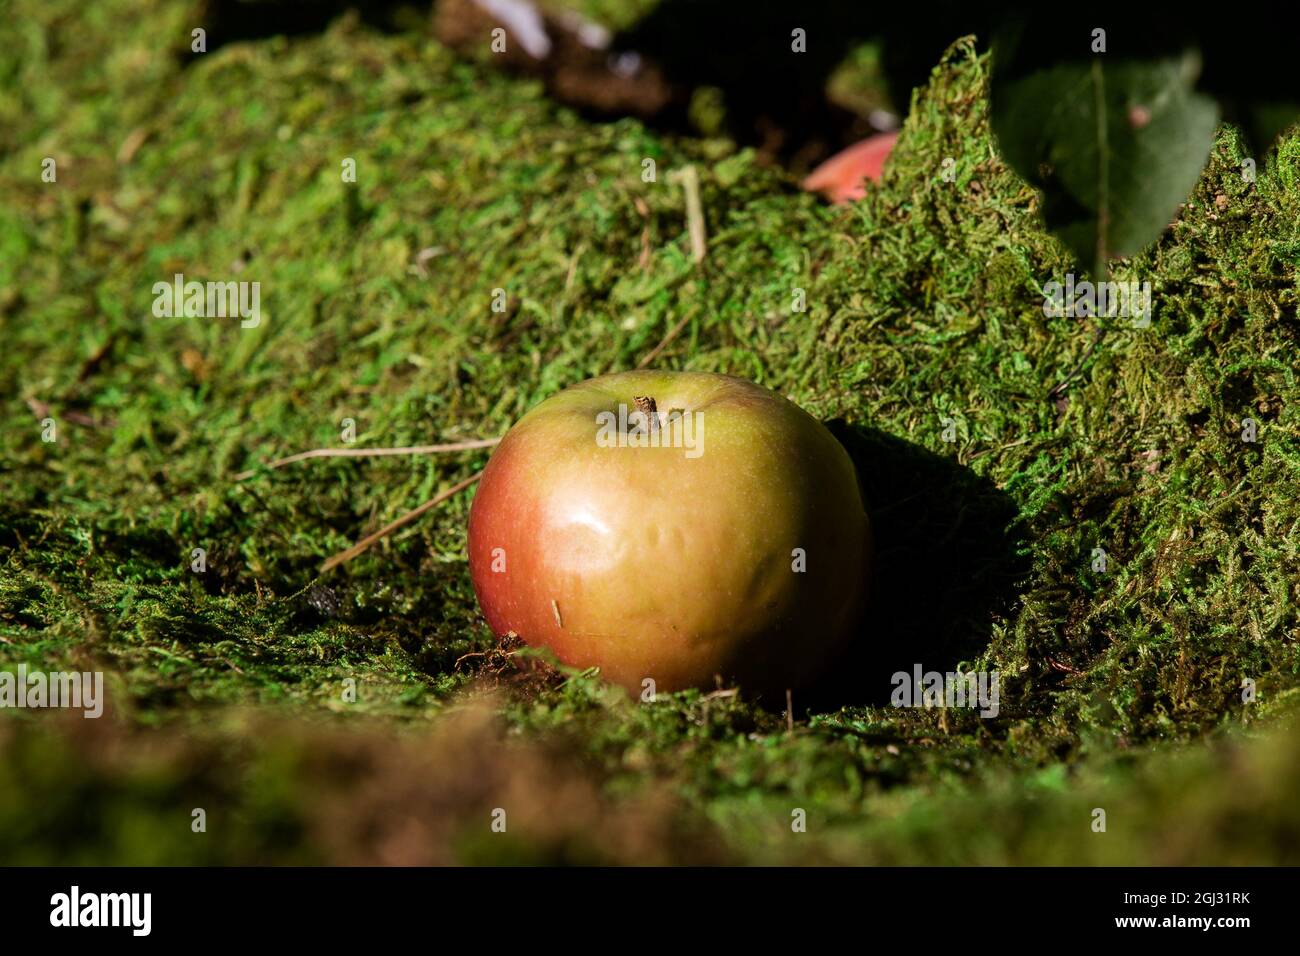 An apple lies on the grass at the Kate Spade New York Fashion Week  installation, which introduced Kate Spade's Fall 2021 limited-edition I  Love NY capsule collection and recreated an apple orchard,